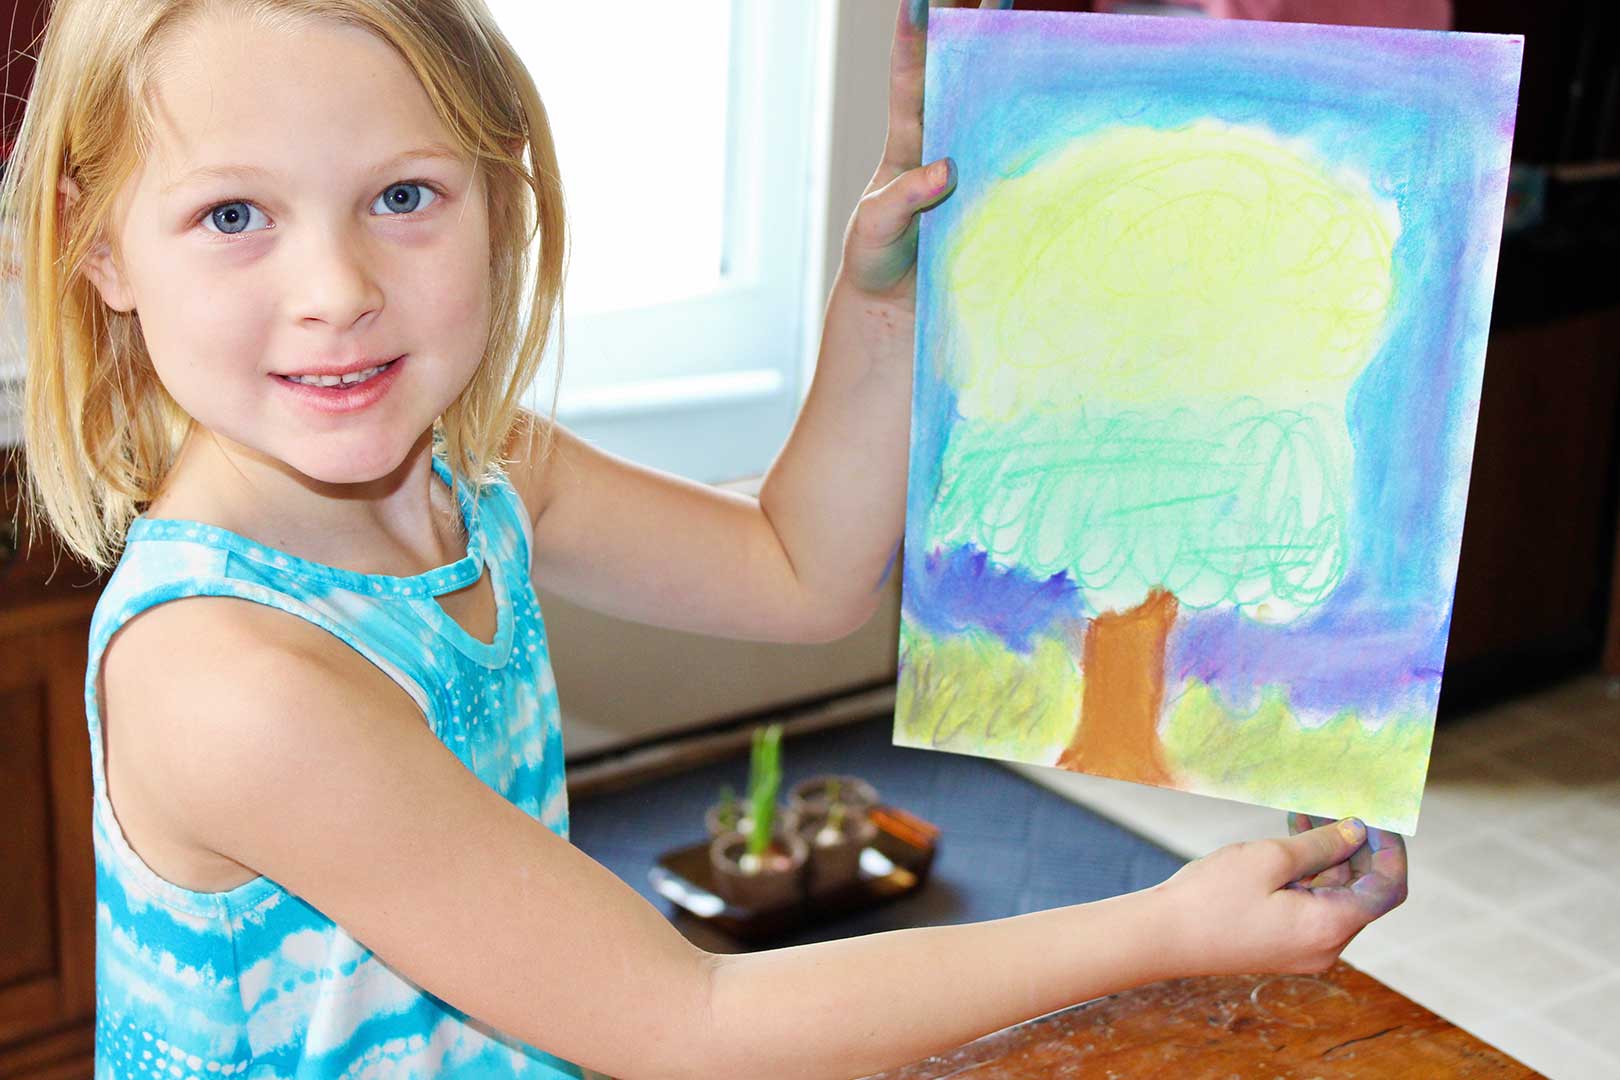 Young girl with blonde hair and blue pattern dress holds up her drawing of a tree drawn with pastels.